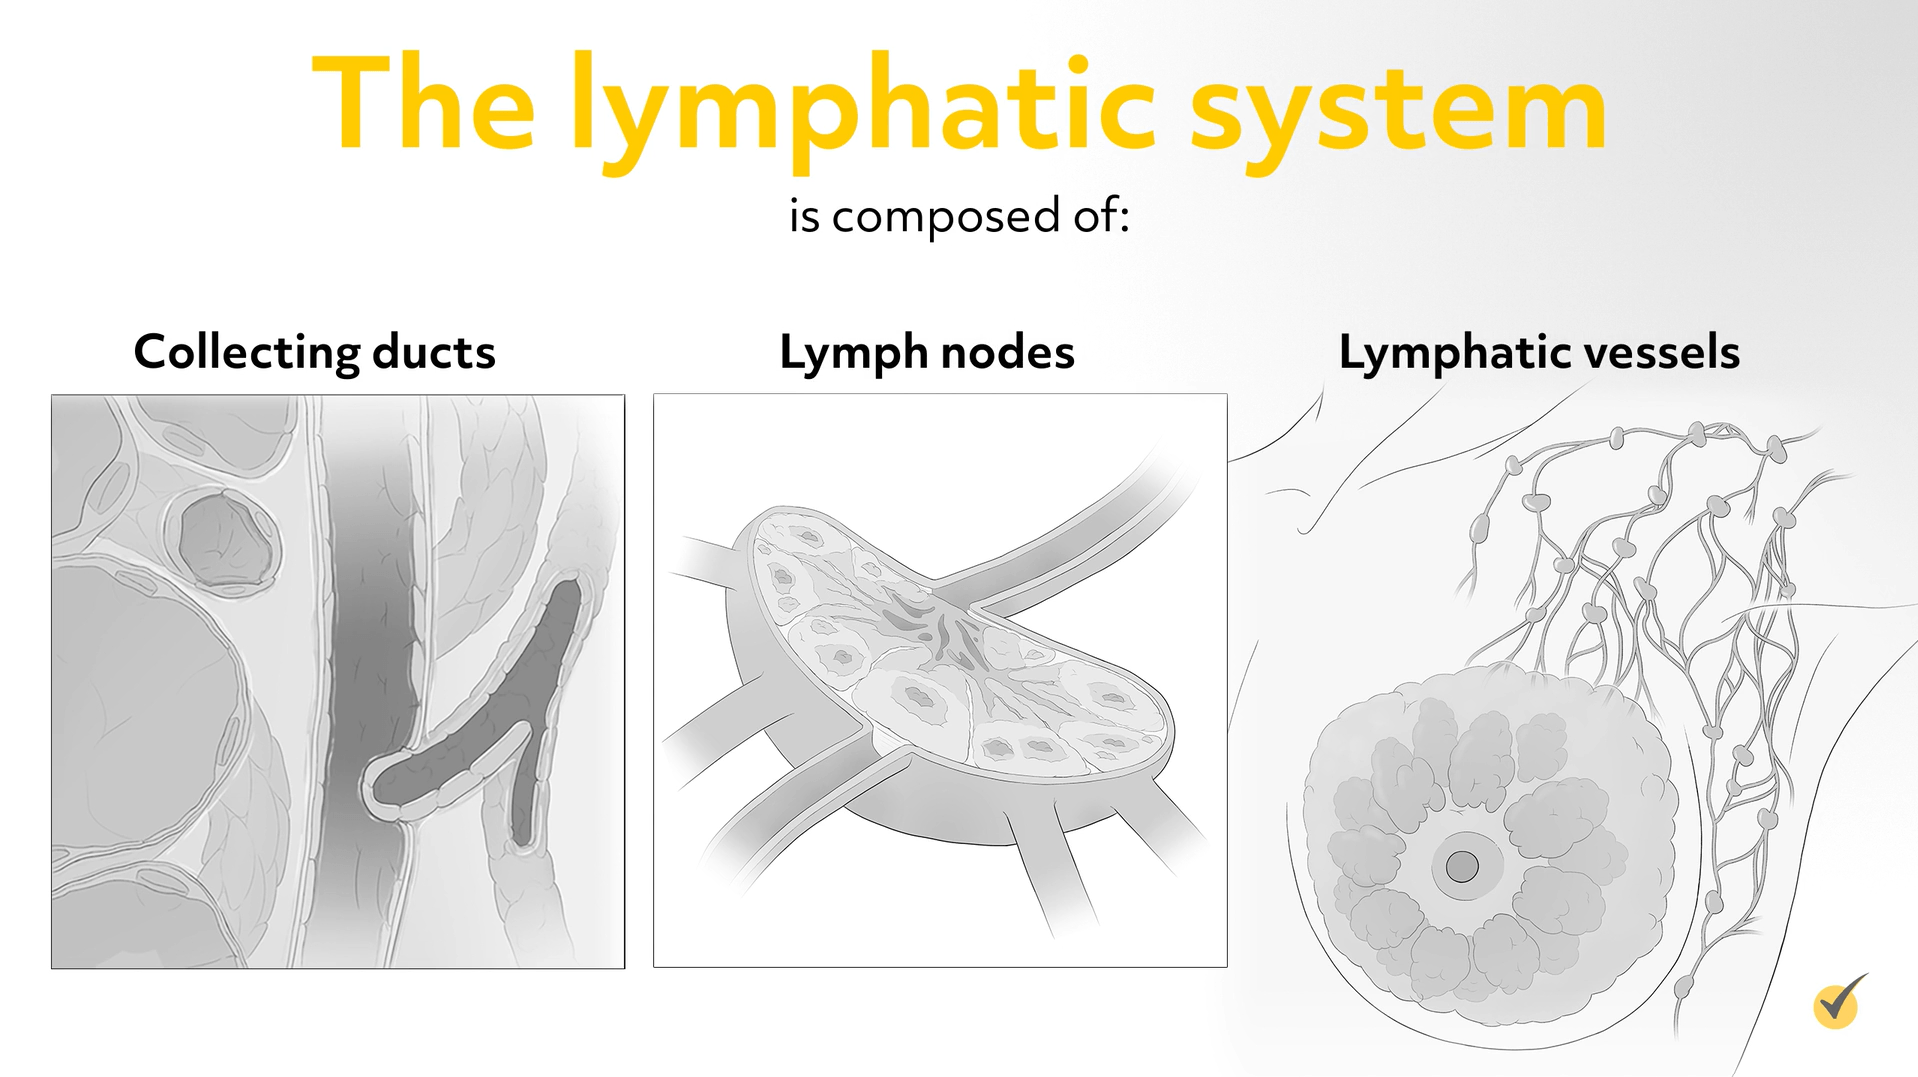 Image of collecting ducts, lymph nodes, and lymphatic vessels.